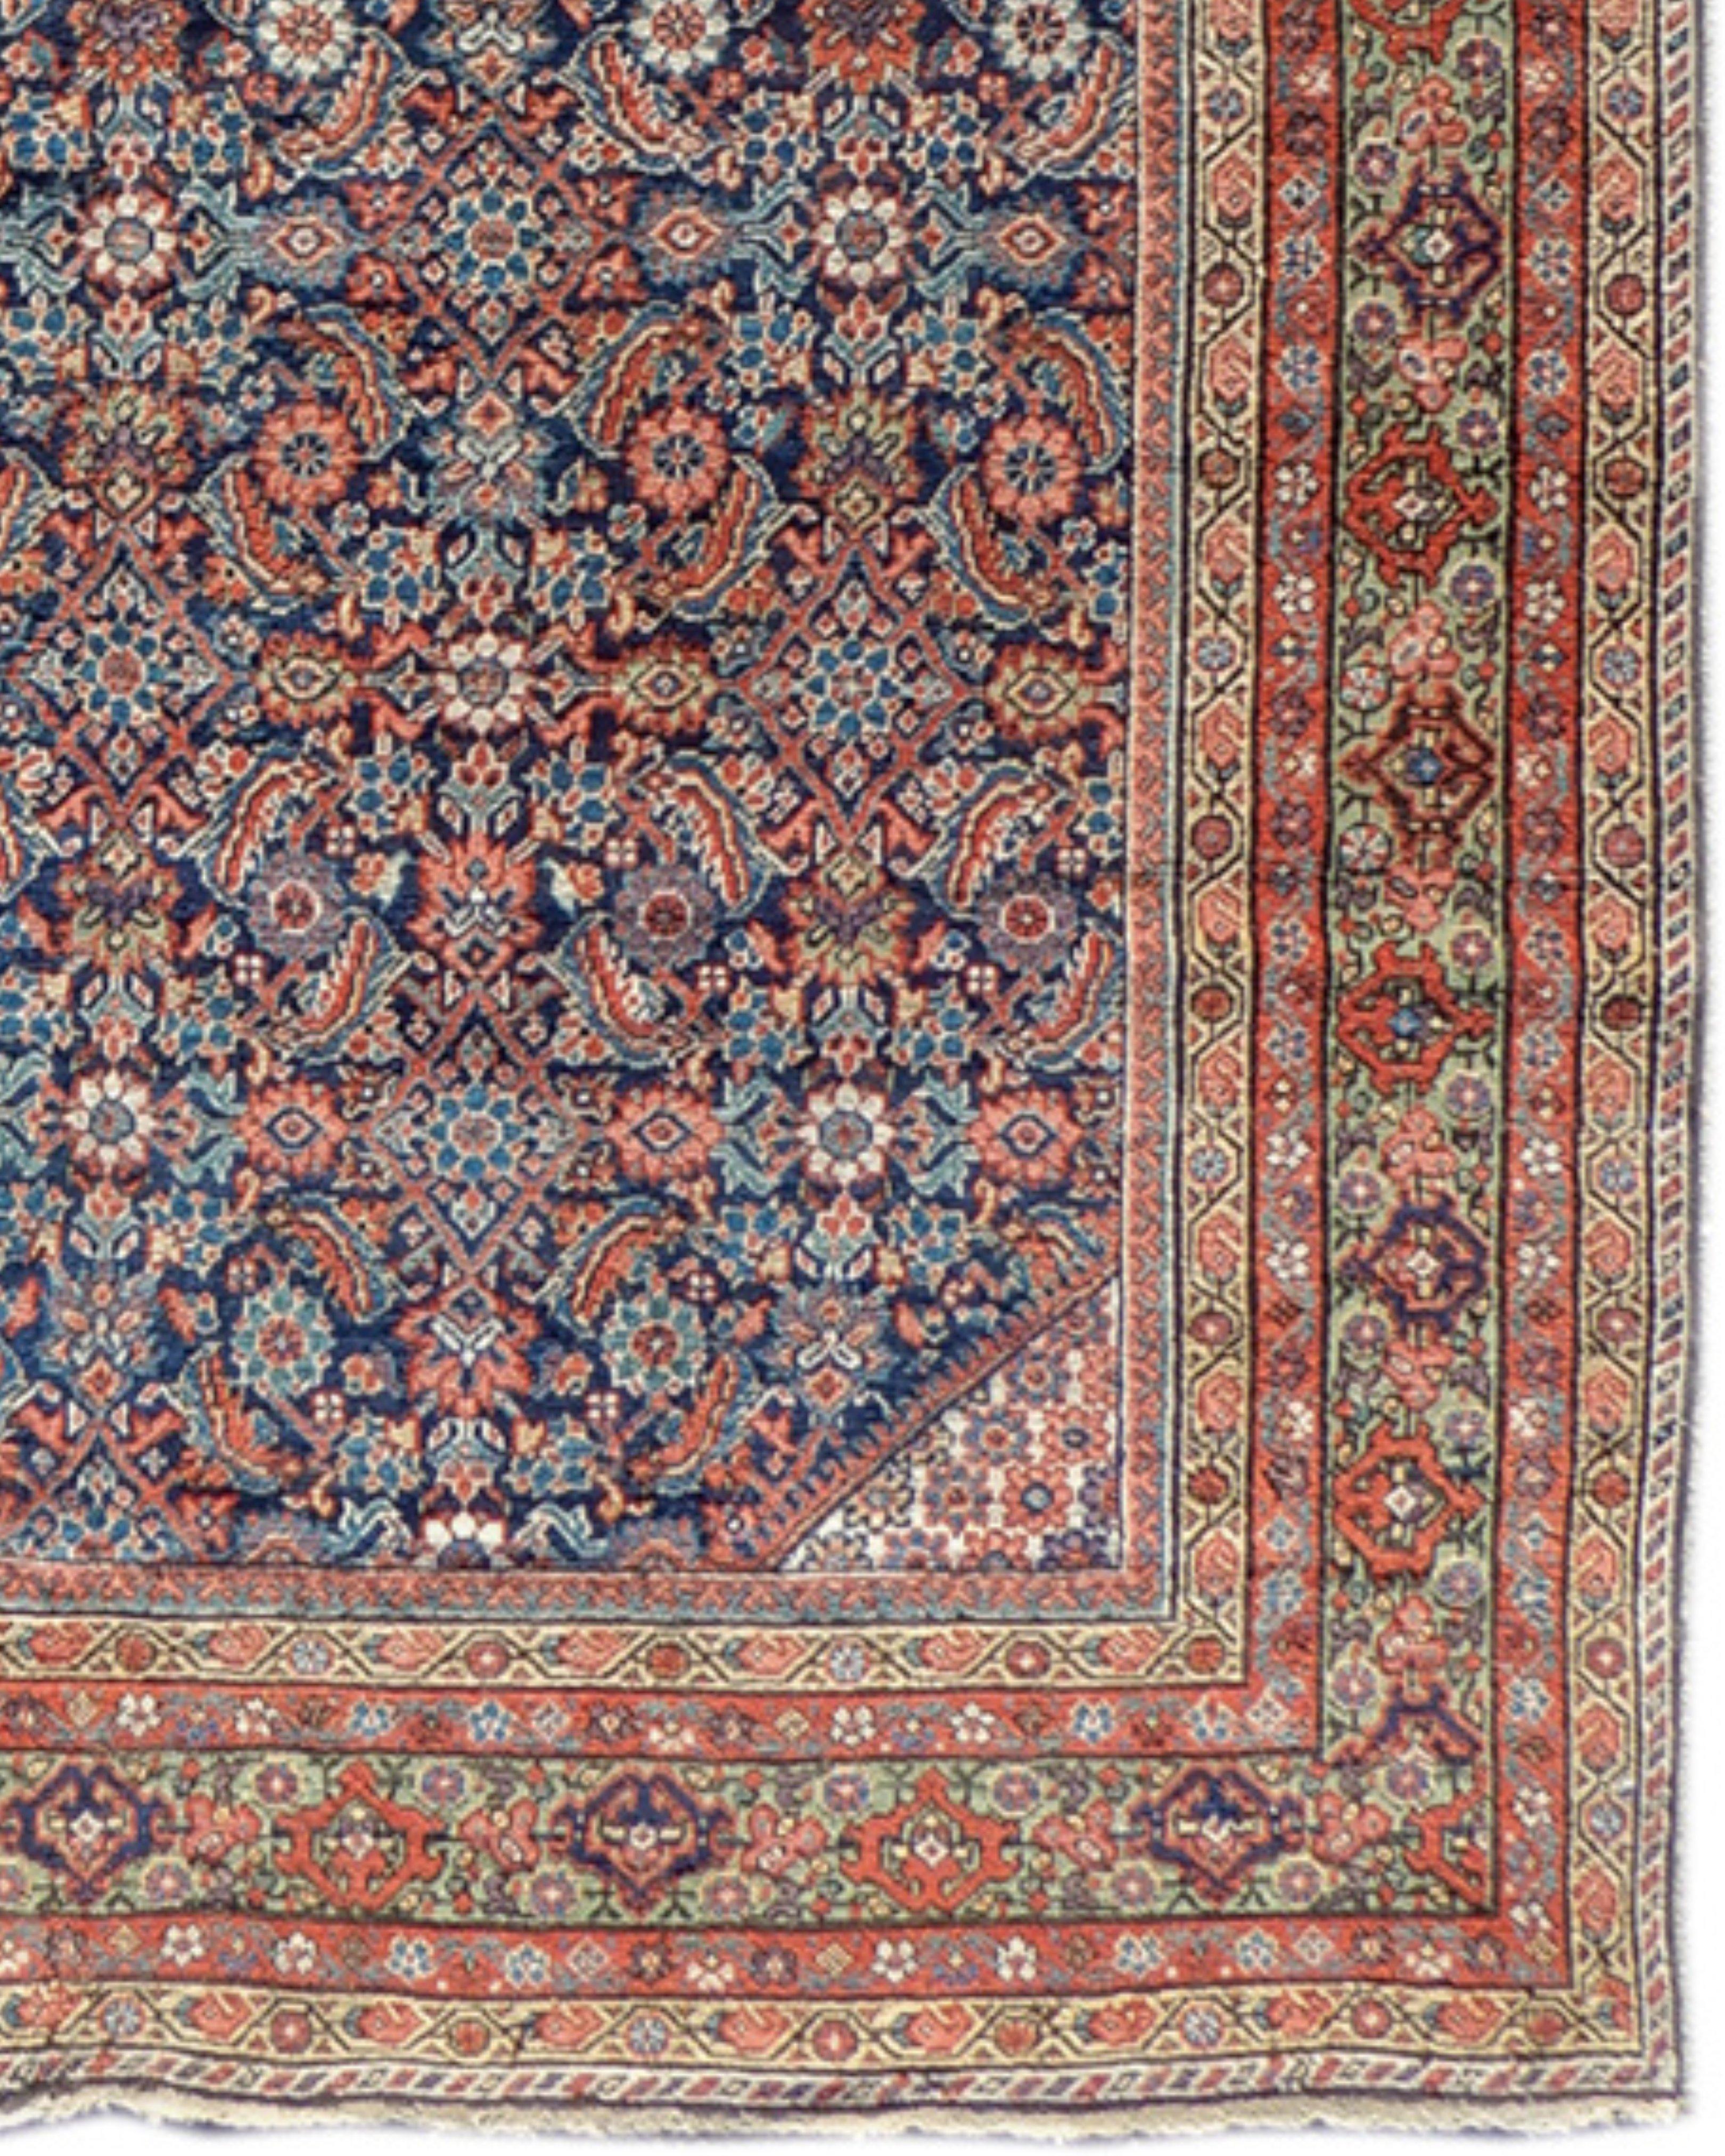 Fereghan Gallery Rug, Late 19th century In Excellent Condition For Sale In San Francisco, CA